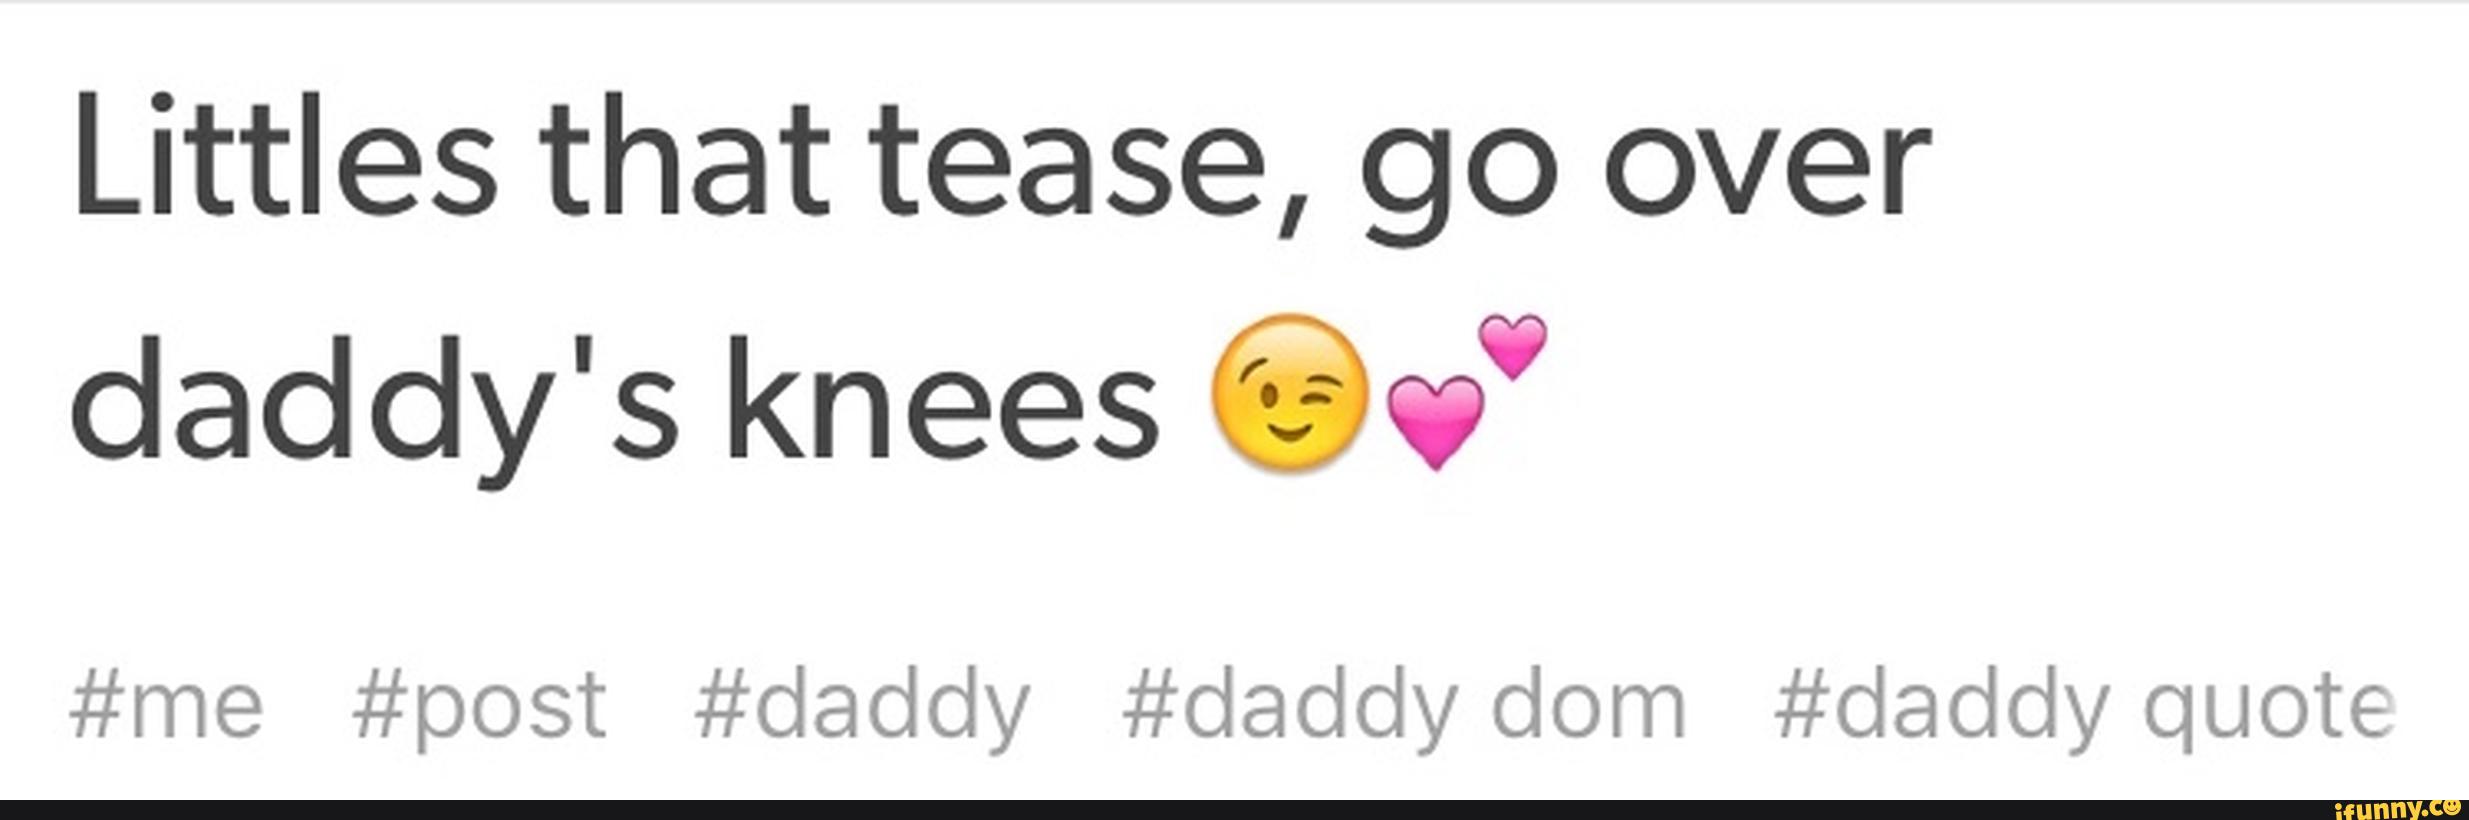 Littles that tease, go over daddy's knees .? #me #post #daddy #daddy d...